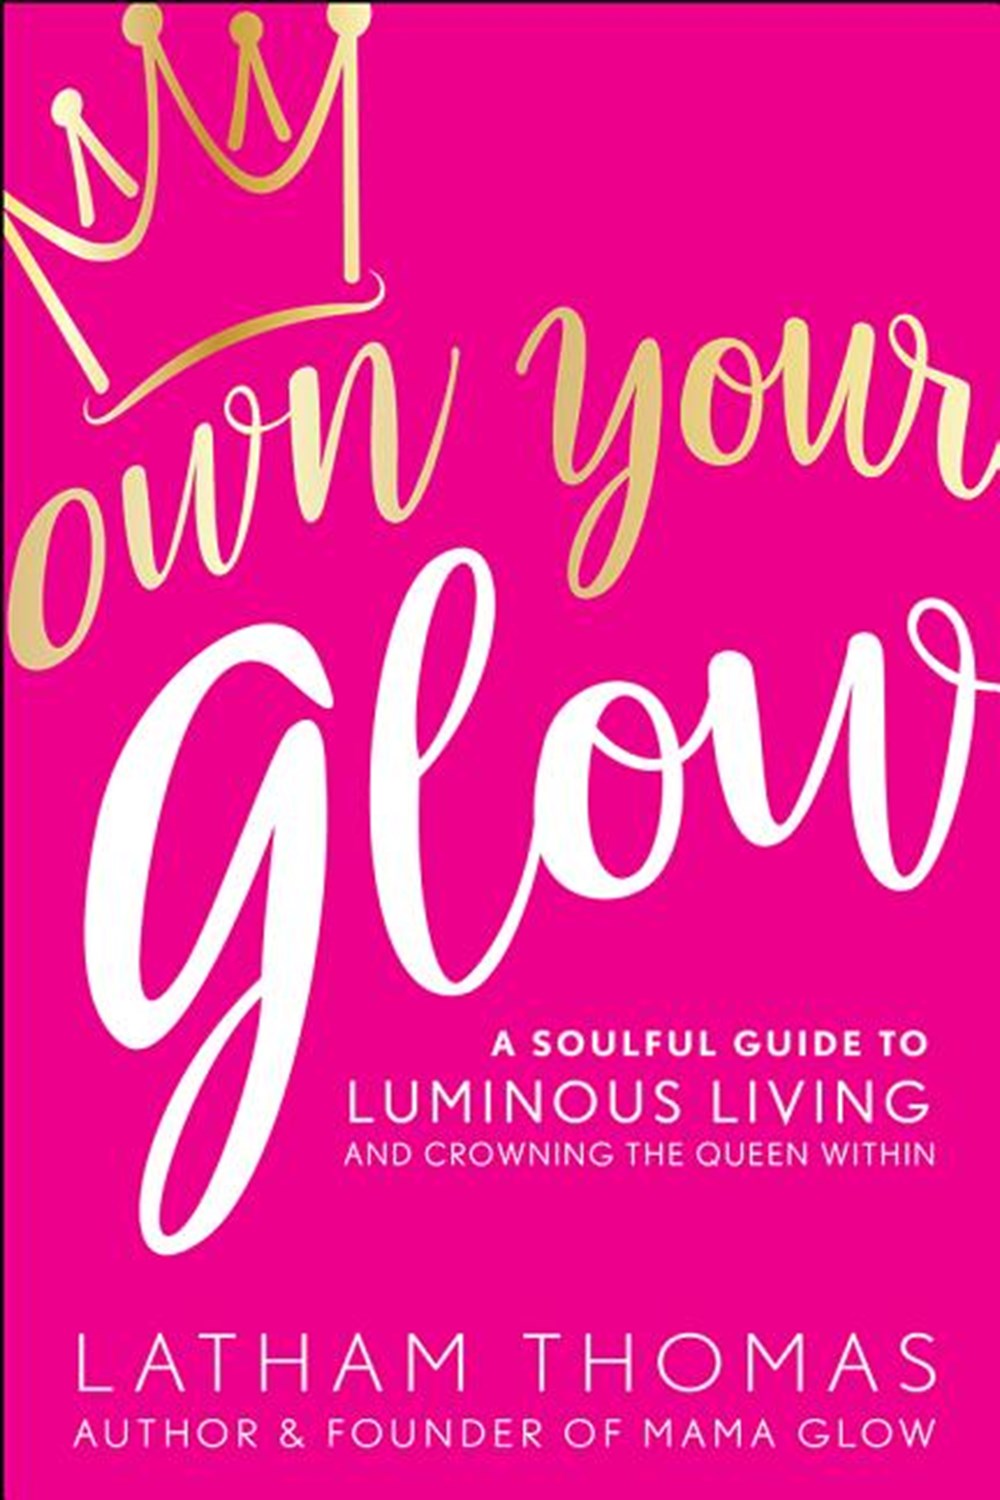 Own Your Glow: A Soulful Guide to Luminous Living and Crowning the Queen Within